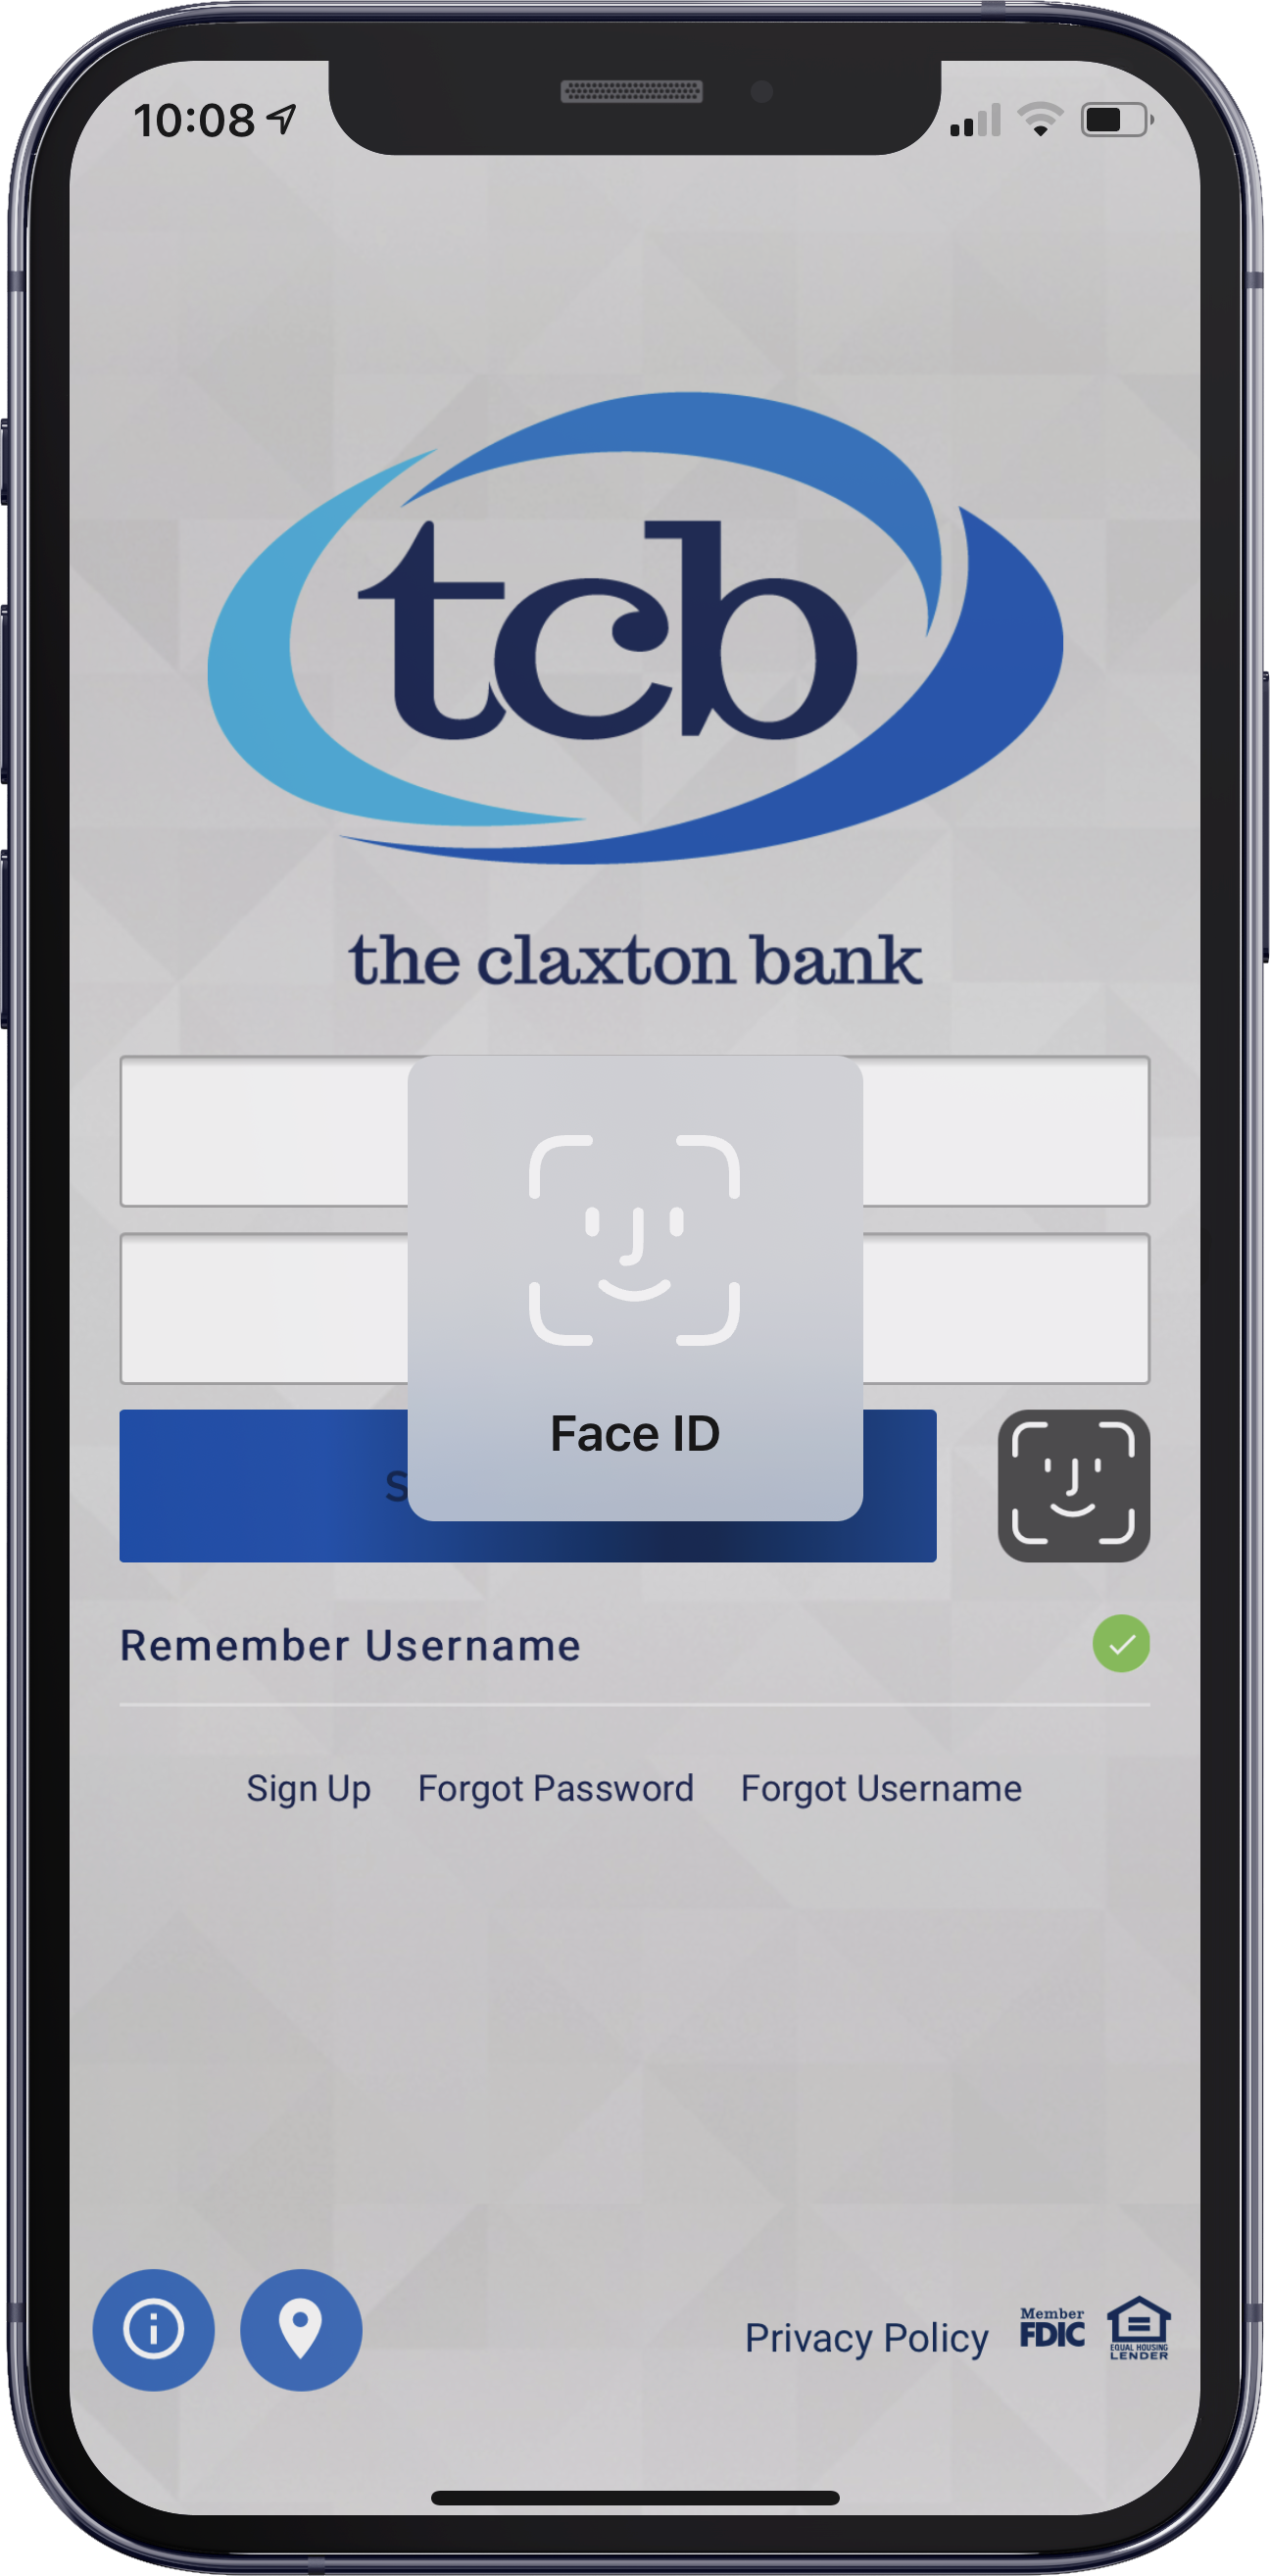 TCB Digital Banking with Face ID